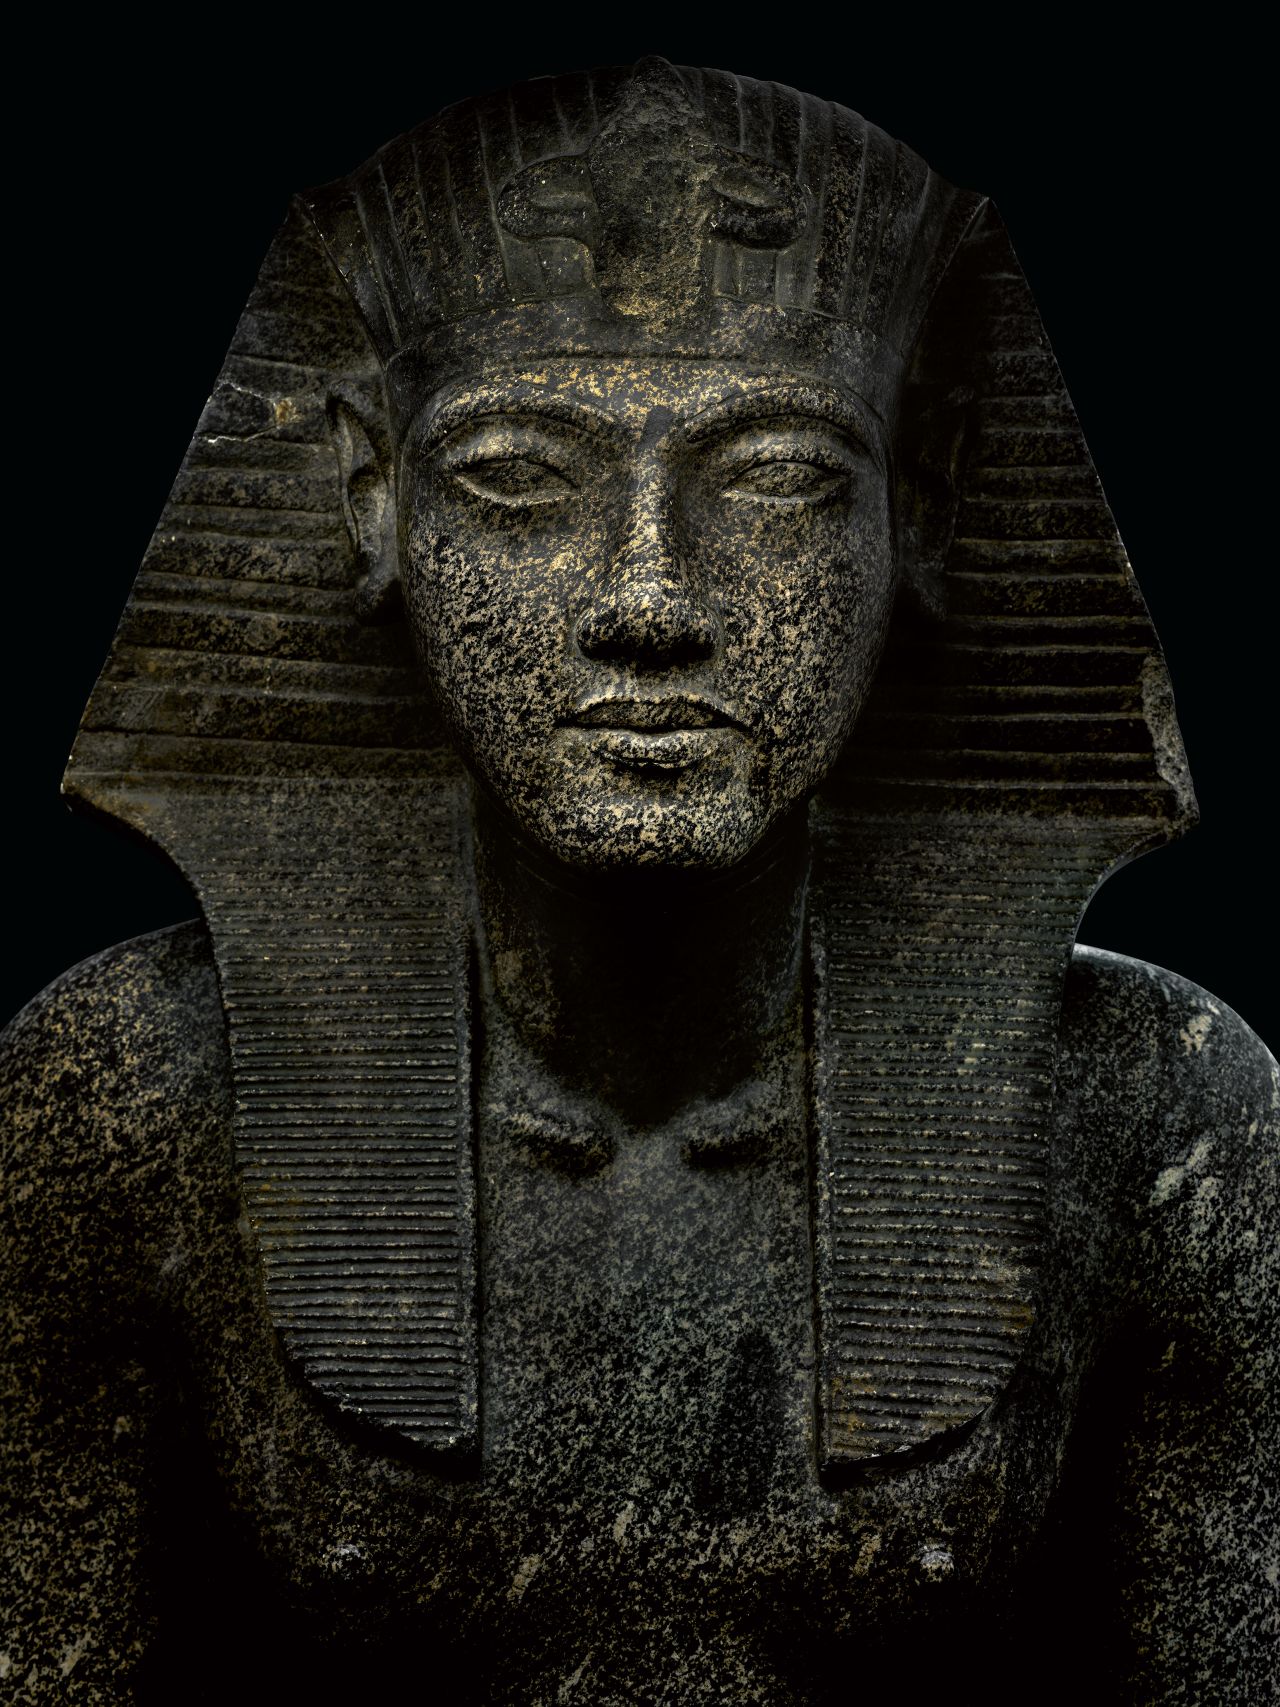 This photograph captures a statue depicting the young king in the nemes headdress.